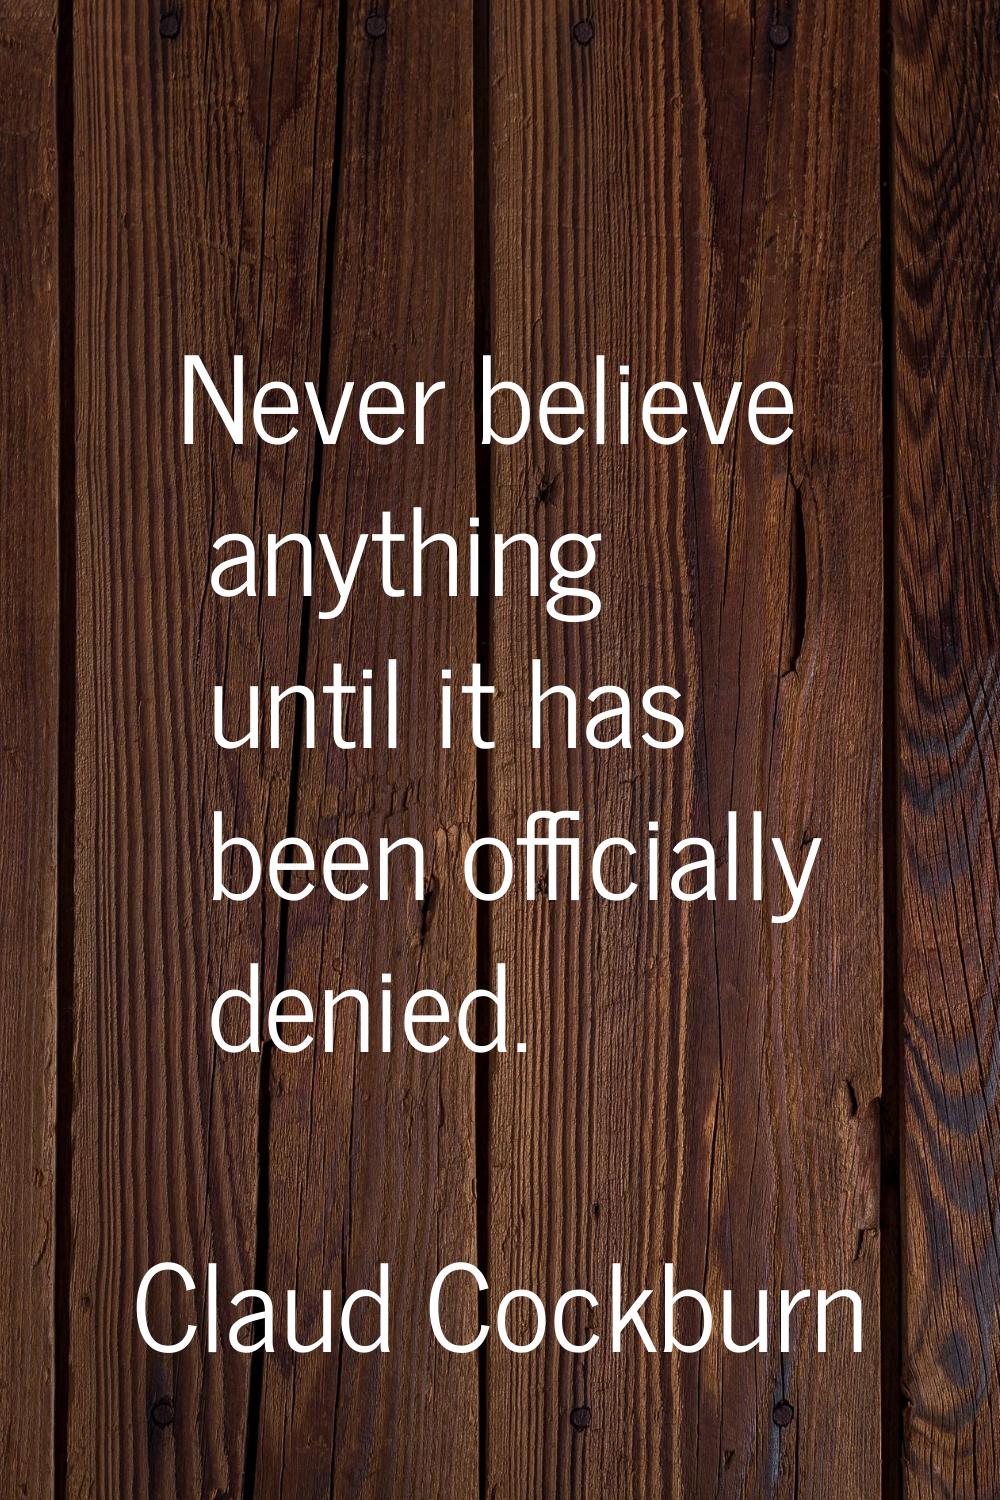 Never believe anything until it has been officially denied.